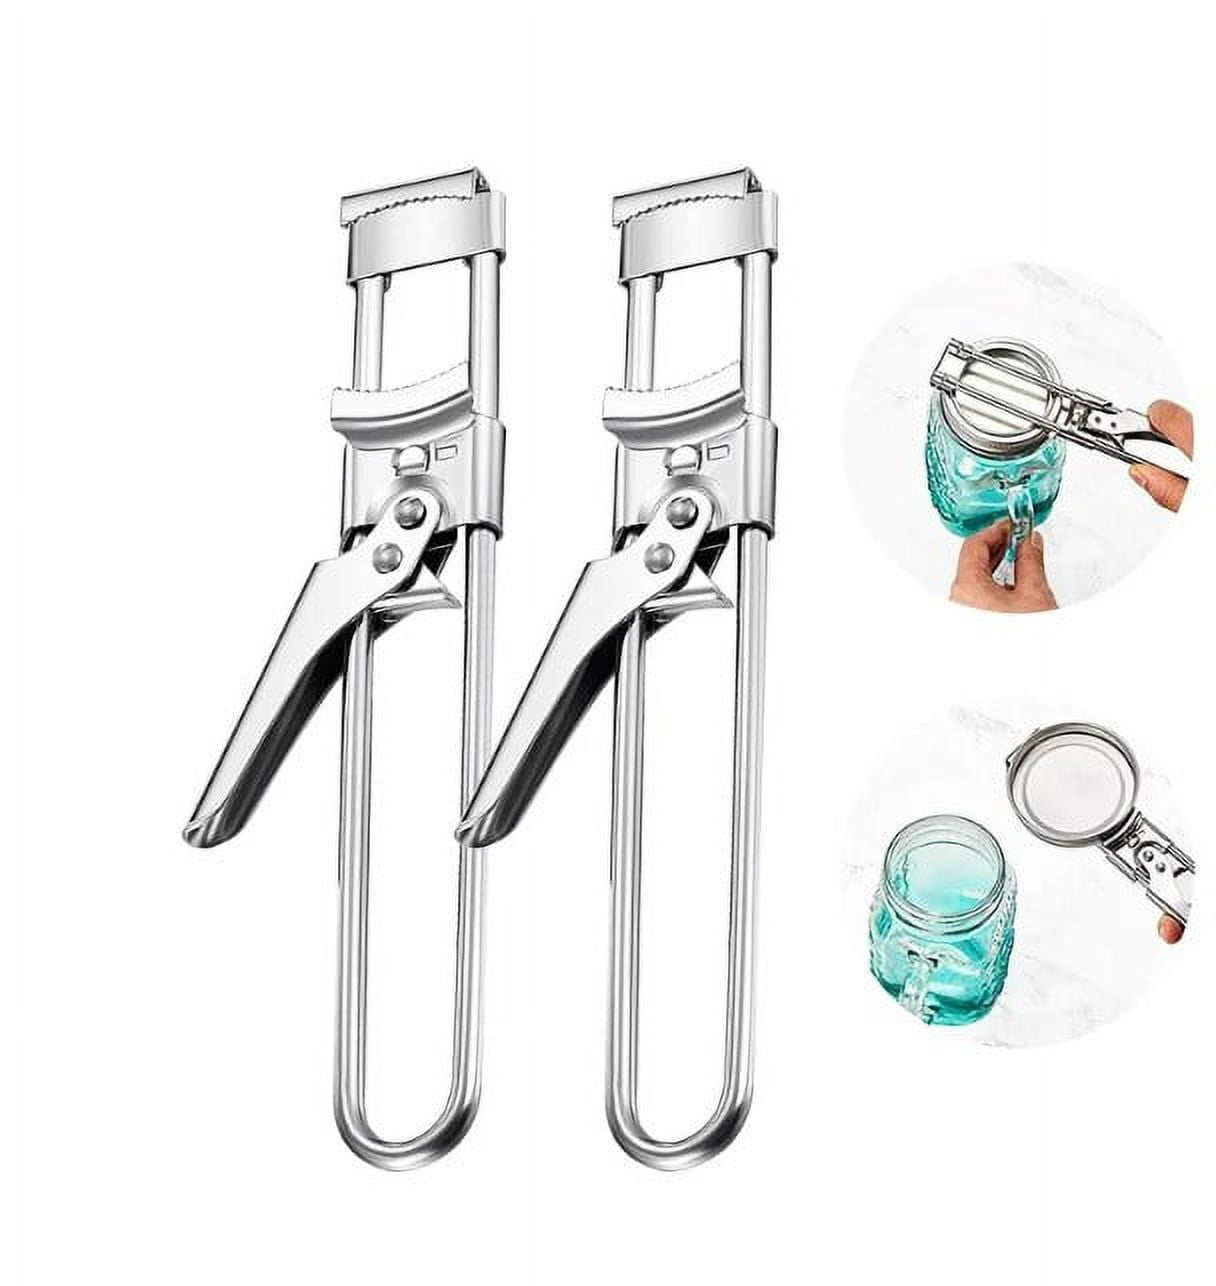 TOPINCN Jar Opener Adjustable Stainless Steel Can Openers Manual Bottle  Lids Off Cover Remover Tin Gripper Easily Opens